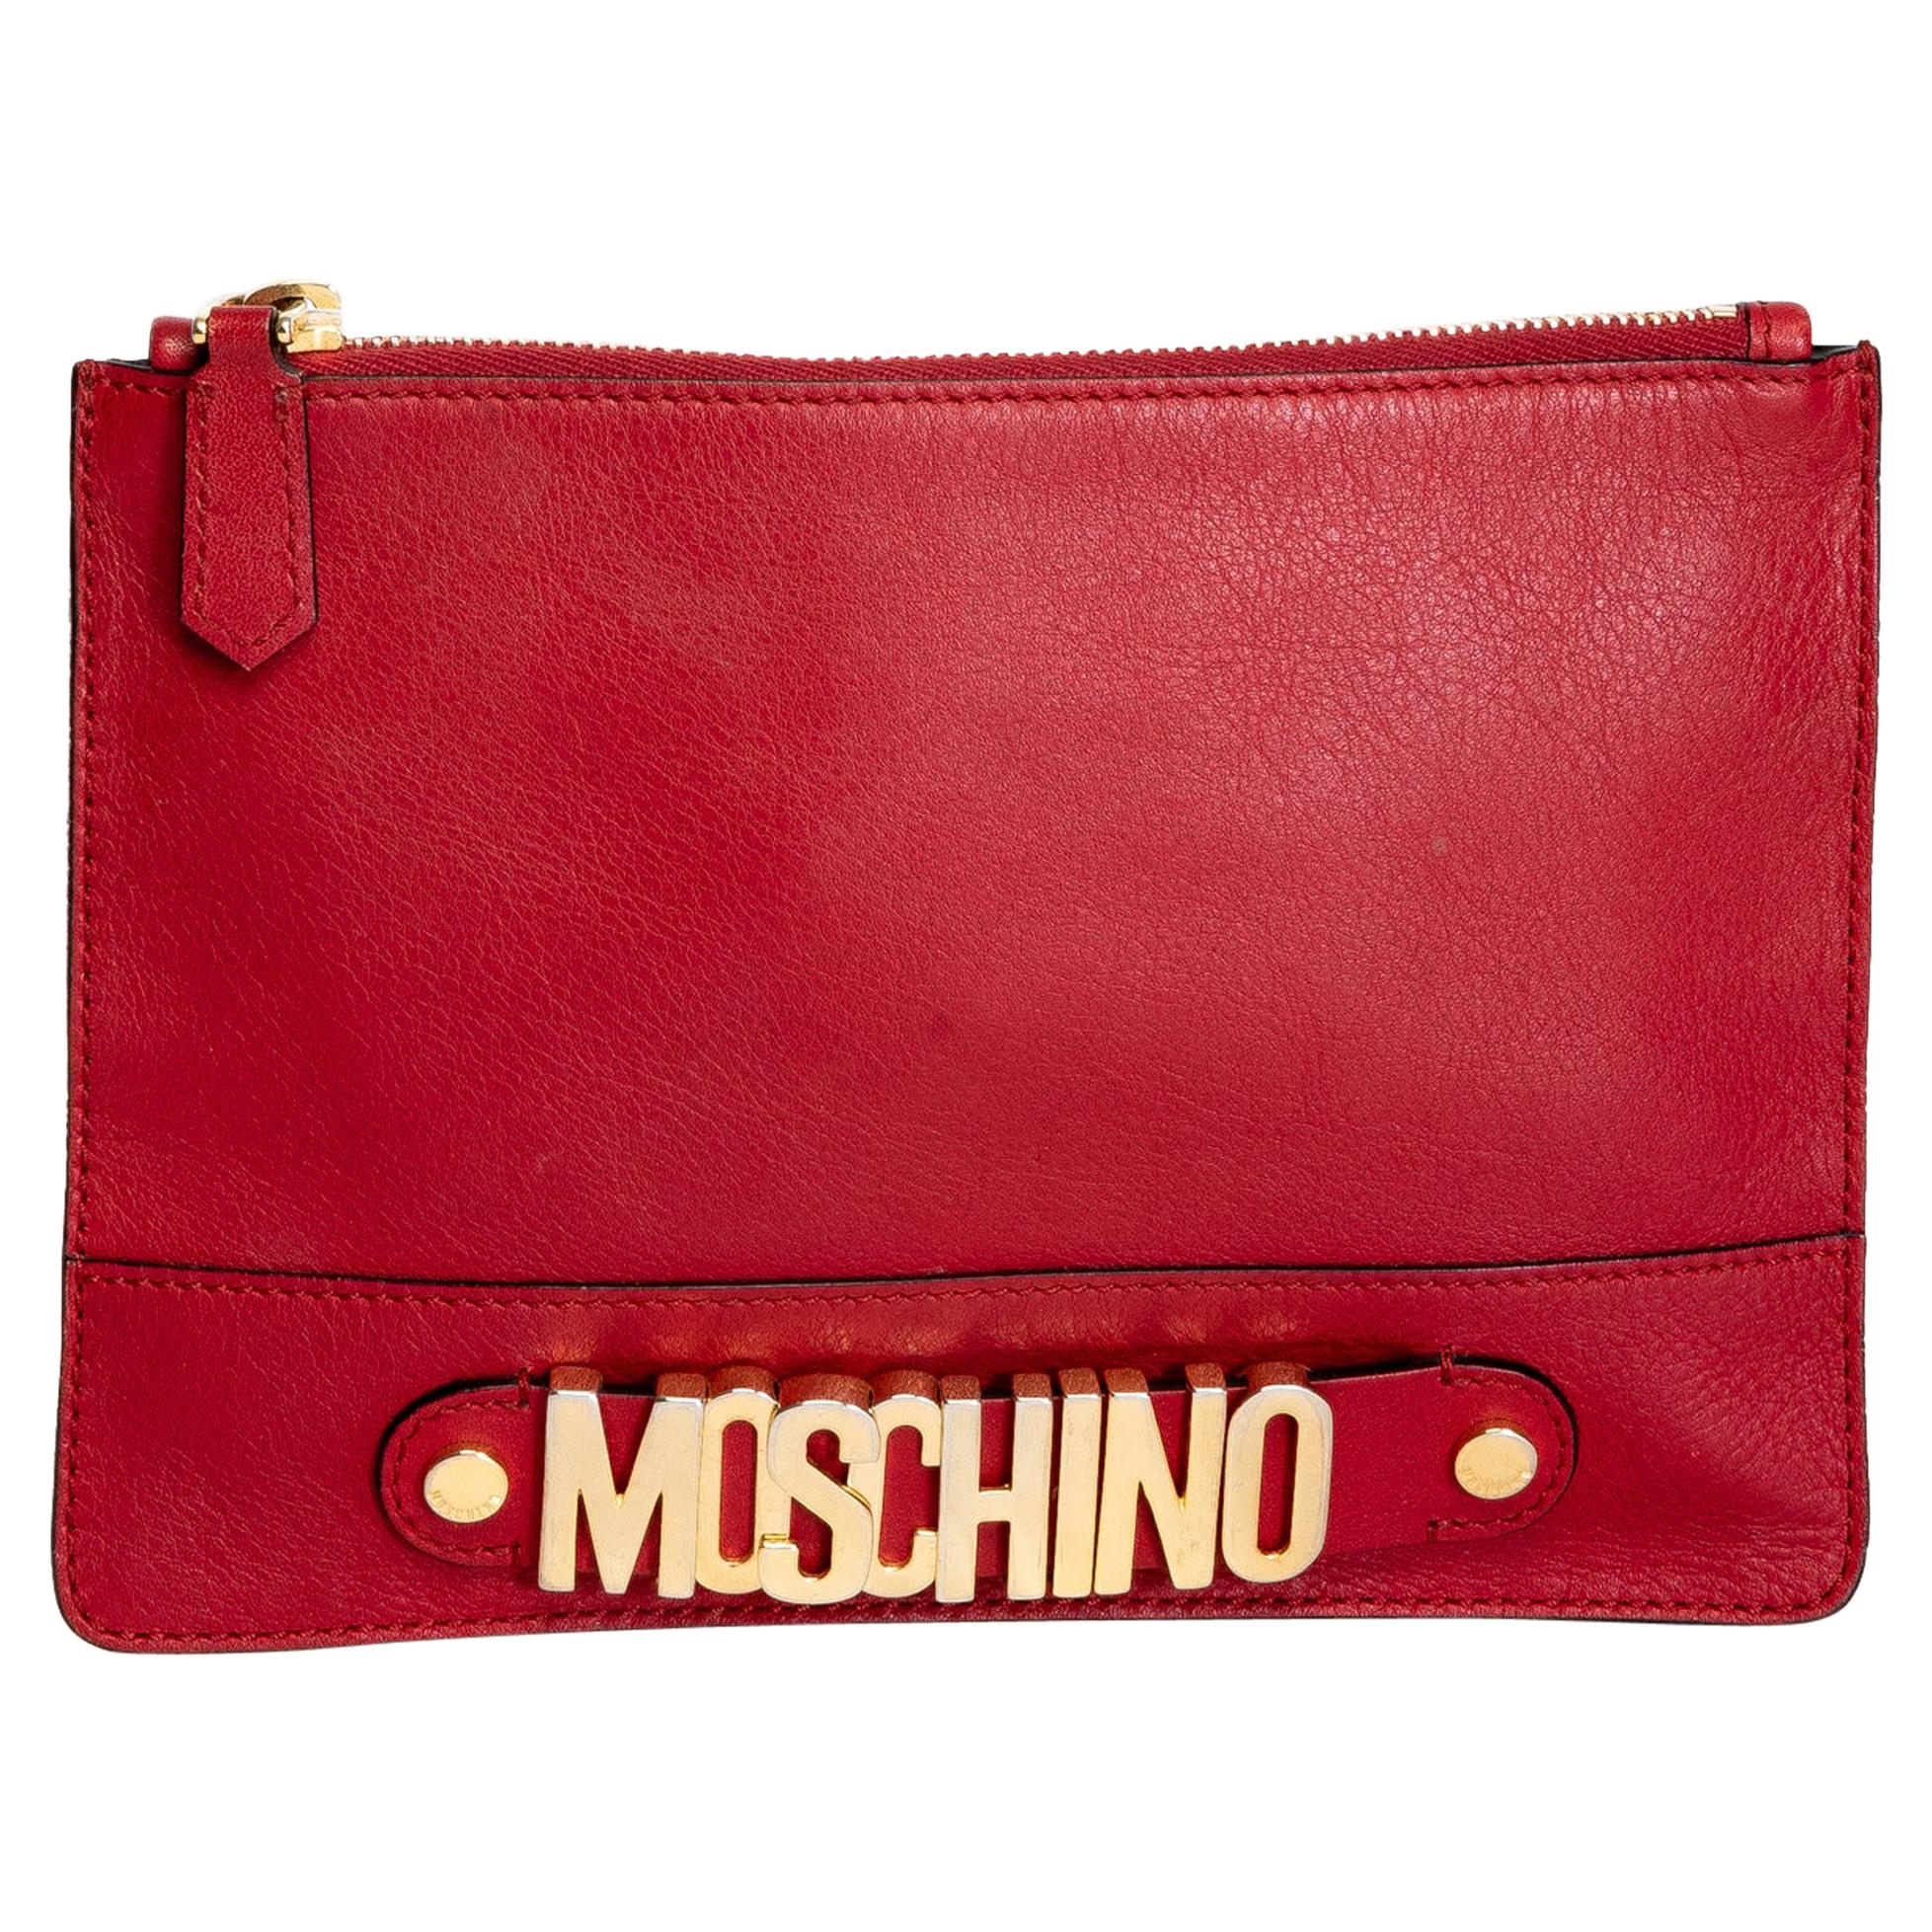 Moschino 30th Anniversary Red Leather Clutch